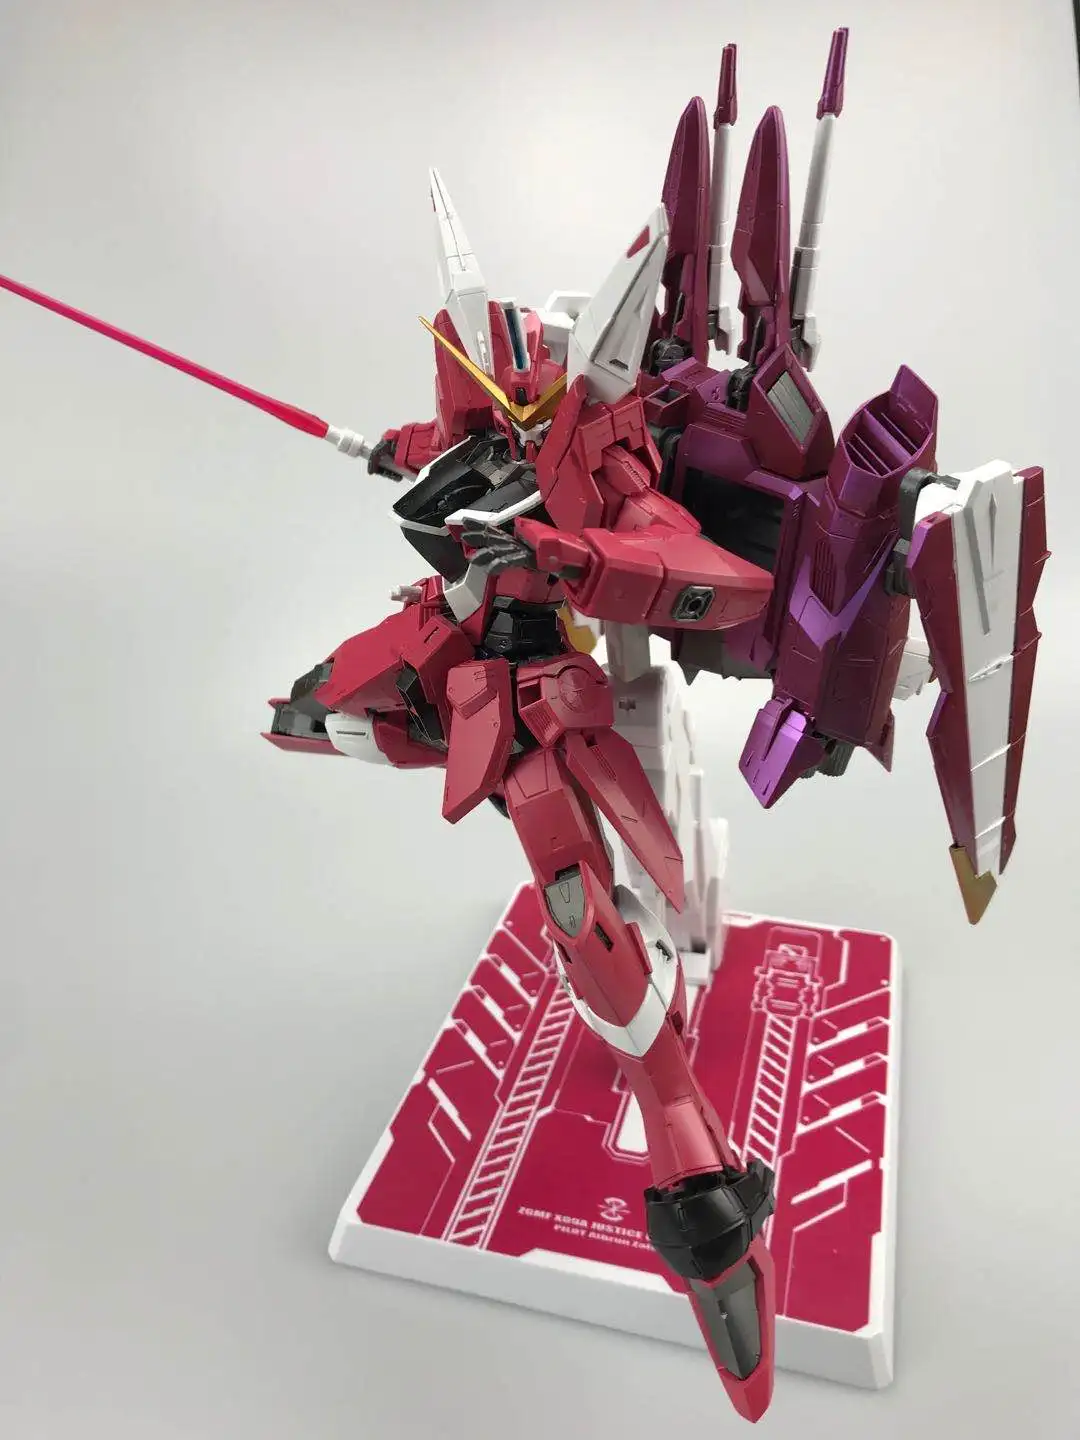 THEWIND MB style Base for MG 1//100 ZGMF-X09A Justice model